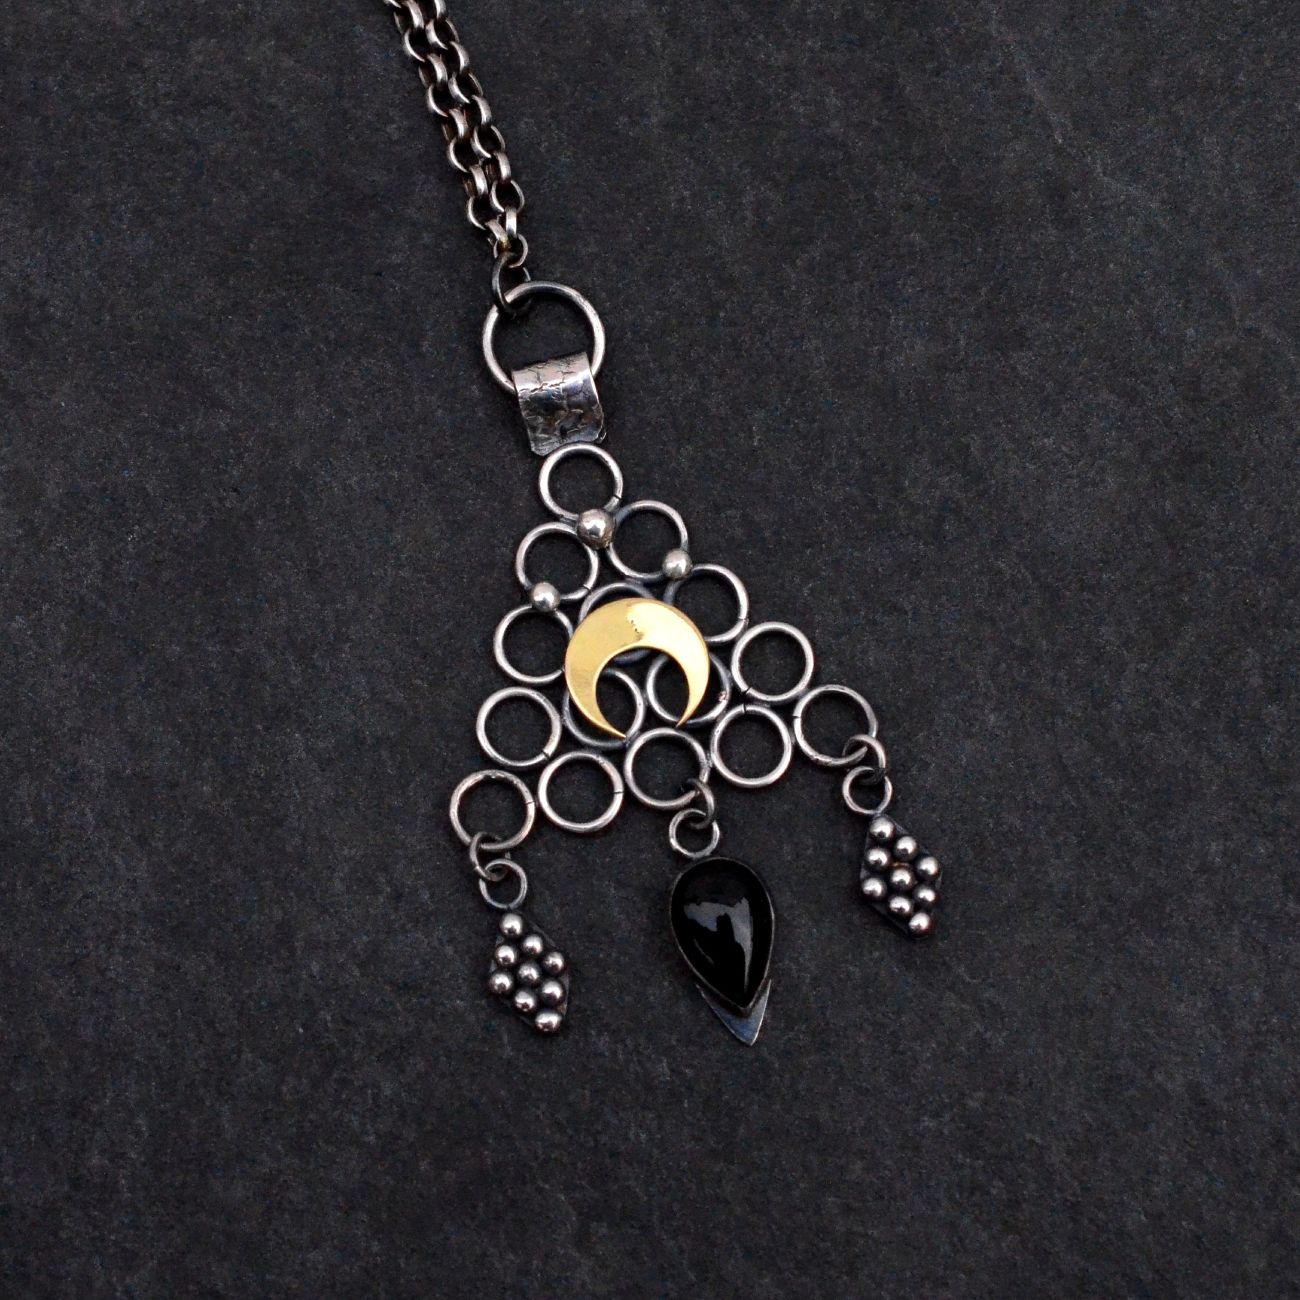 Onyx Crescent Moon Geometrical Necklace - Relic Collection